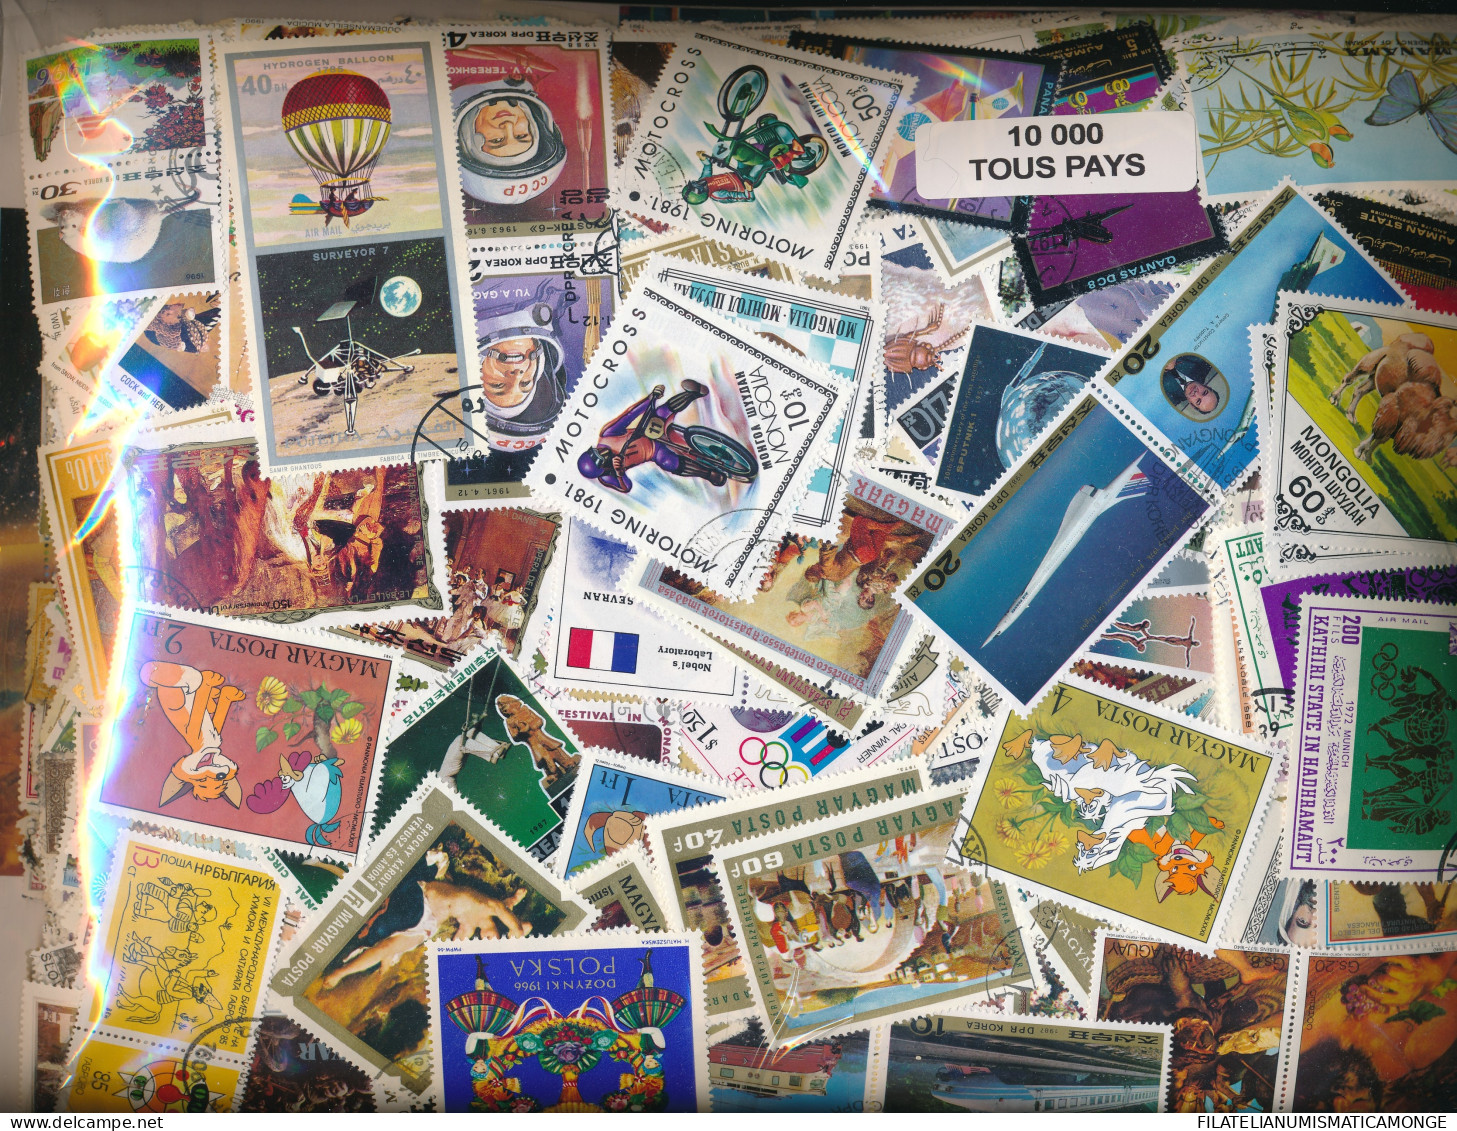  Offer - Lot Stamps - Paqueteria  Mundial 10000 Diferentes / Foto Generica      - Lots & Kiloware (mixtures) - Min. 1000 Stamps